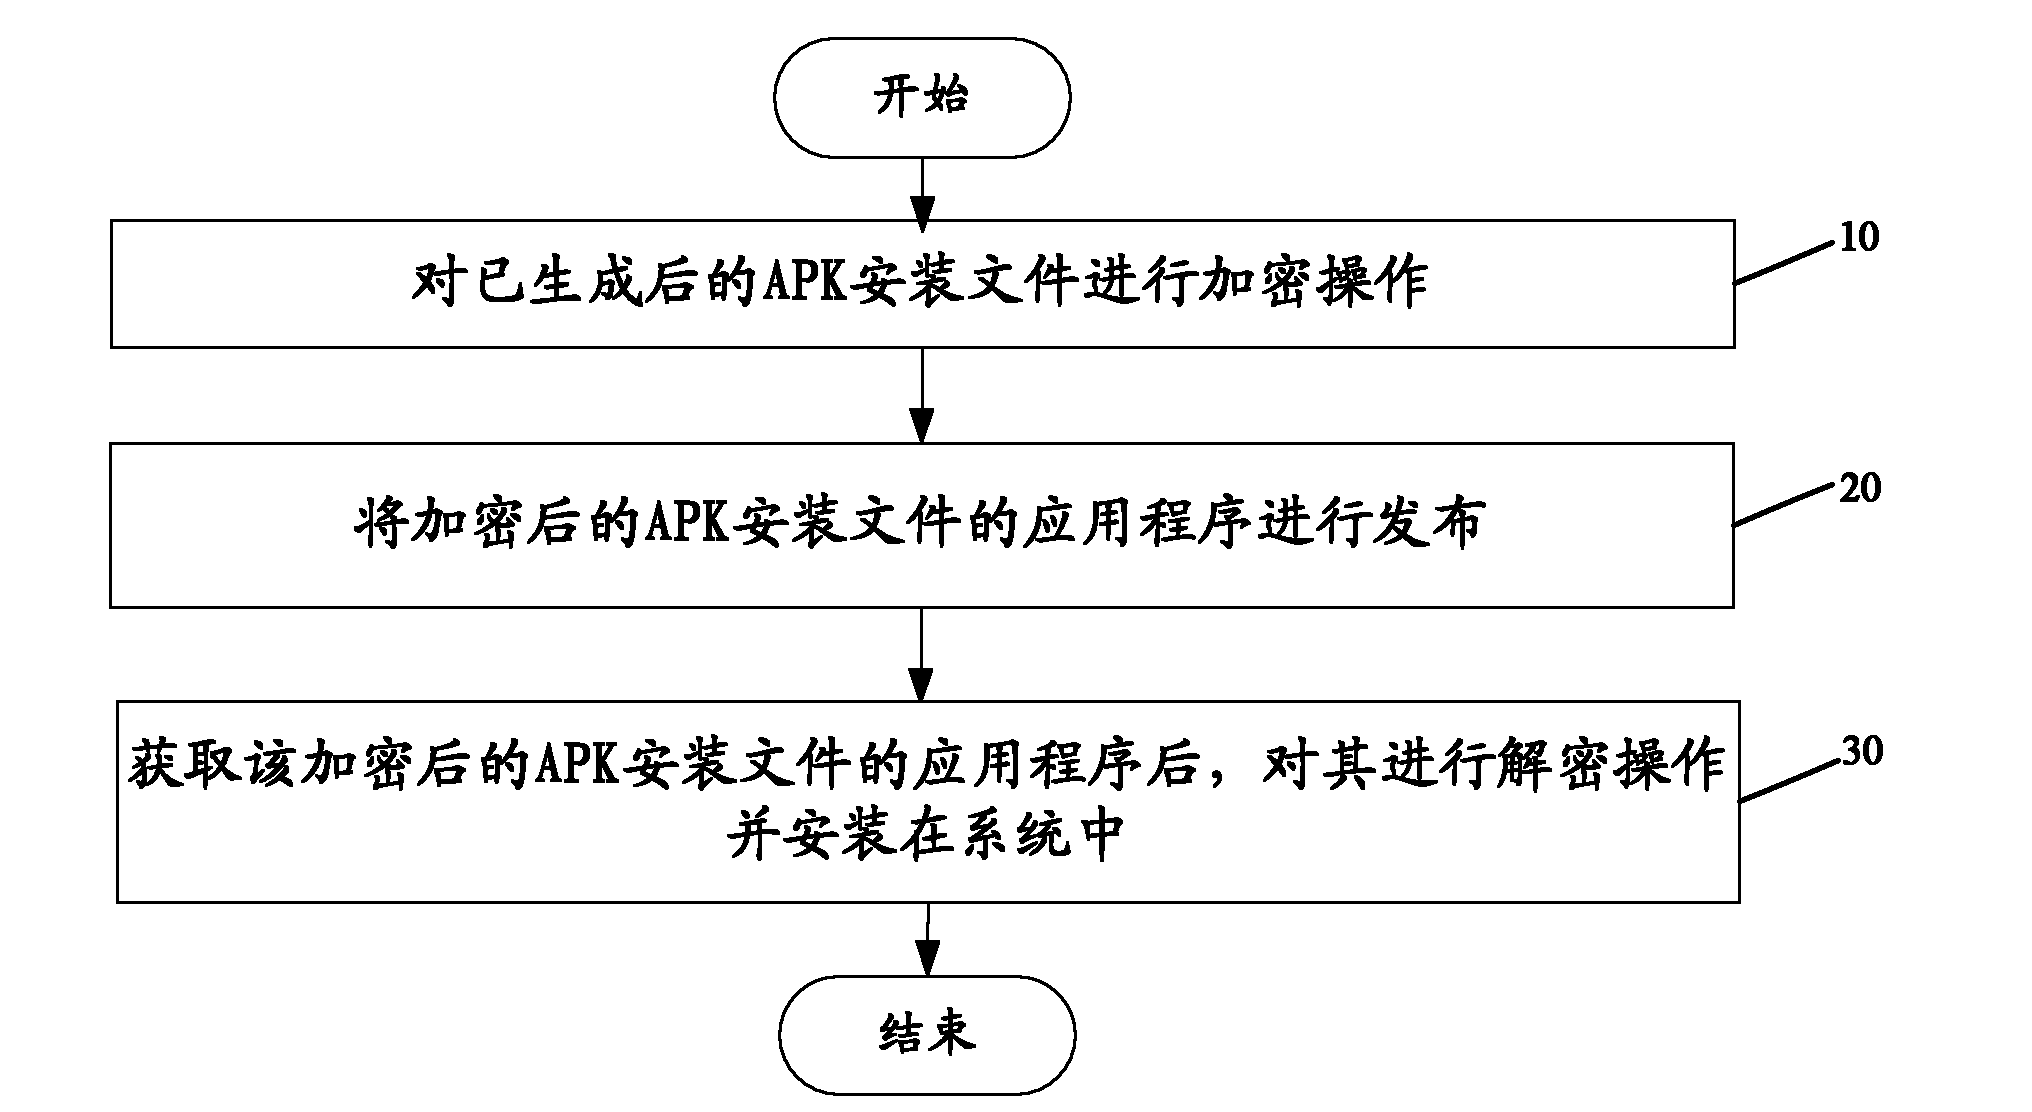 Android-based platform application installation control method and system